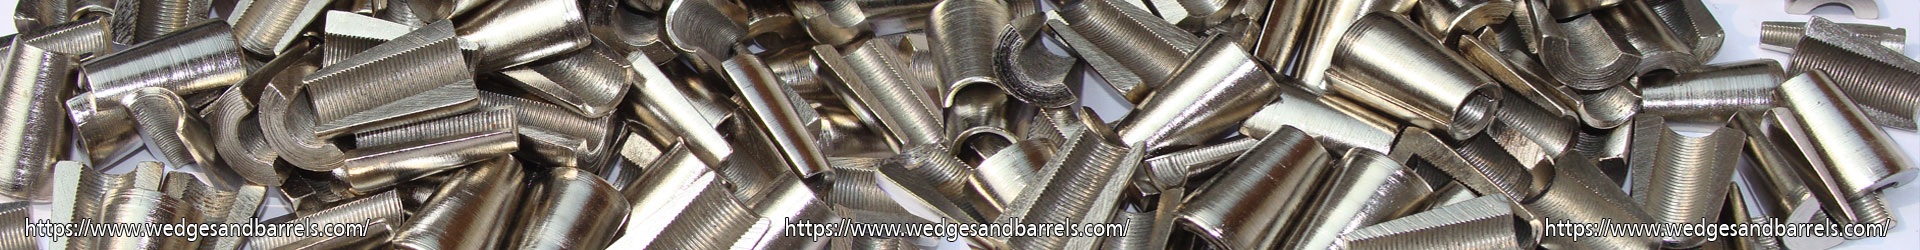 3 Part Wedges 2 Part Wedges Anchor Grips Wedges manufacturers in India Punjab Ludhiana